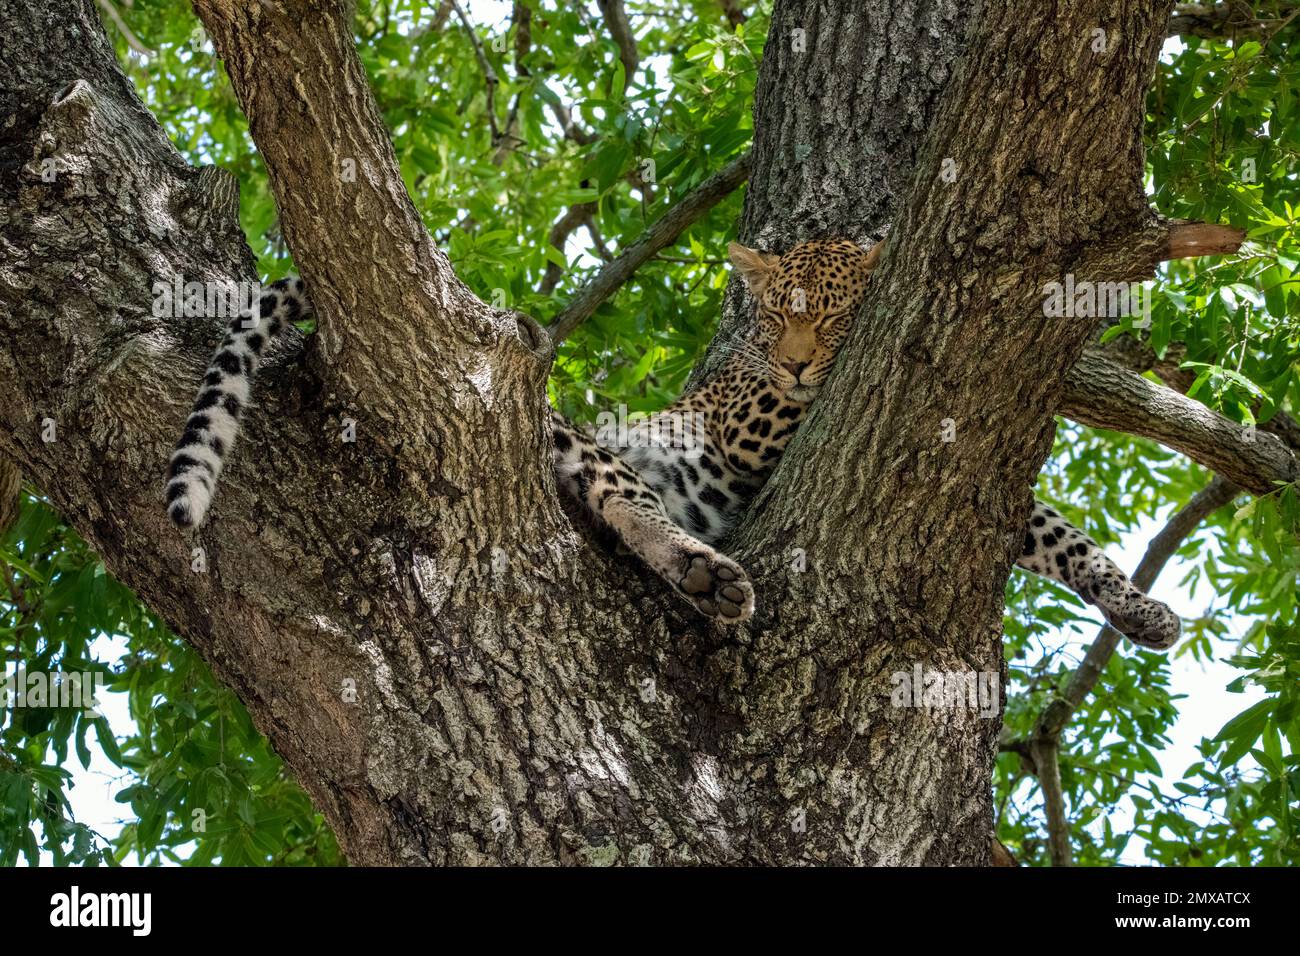 Leopard sleeping in the Branches of a Tree Stock Photo